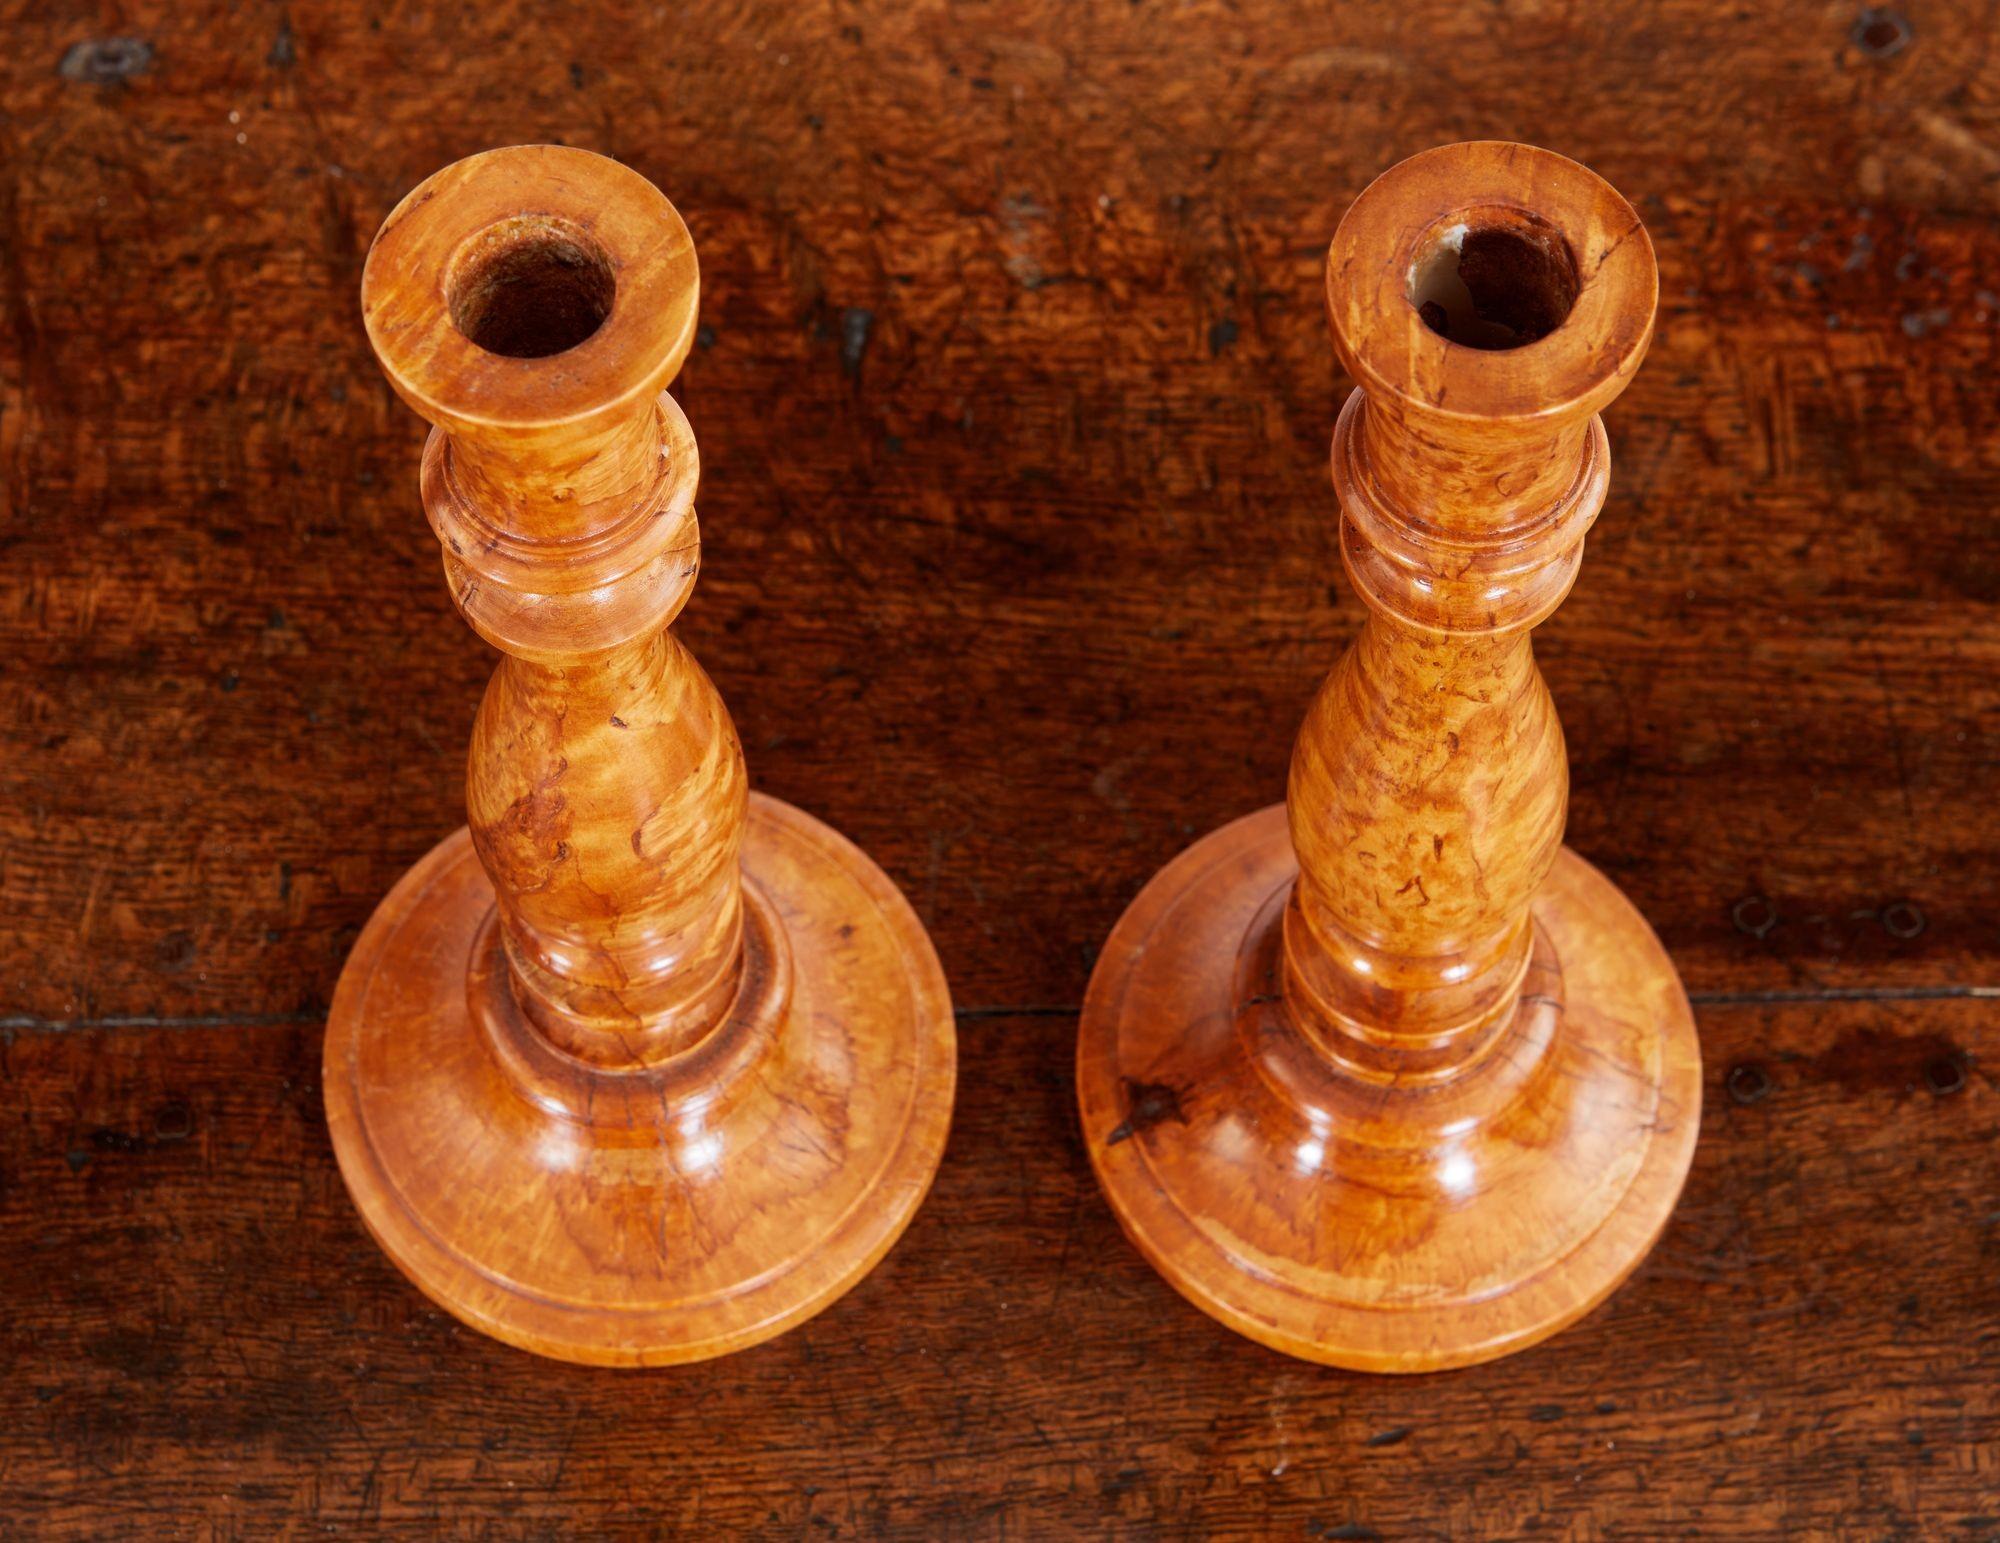 Fine pair of Swedish turned burl birch candlesticks having vasiform body on turned base, the whole with good rich color and superb grain.
 
Treen